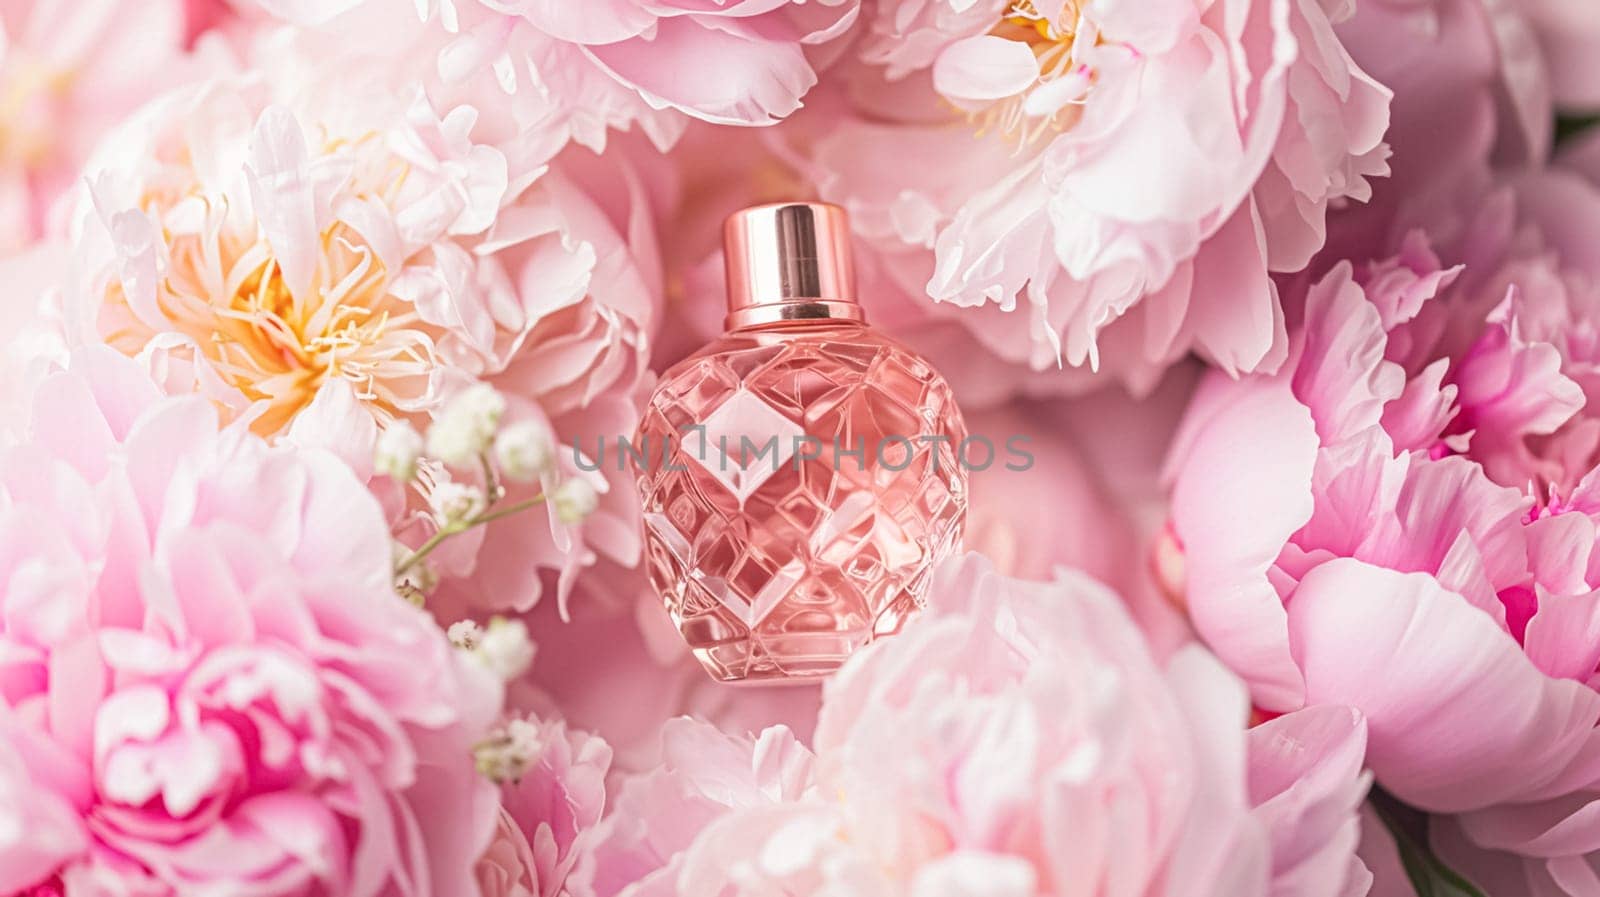 Perfume bottle with beautiful flowers. Beauty concept. Flat lay, top view by Olayola